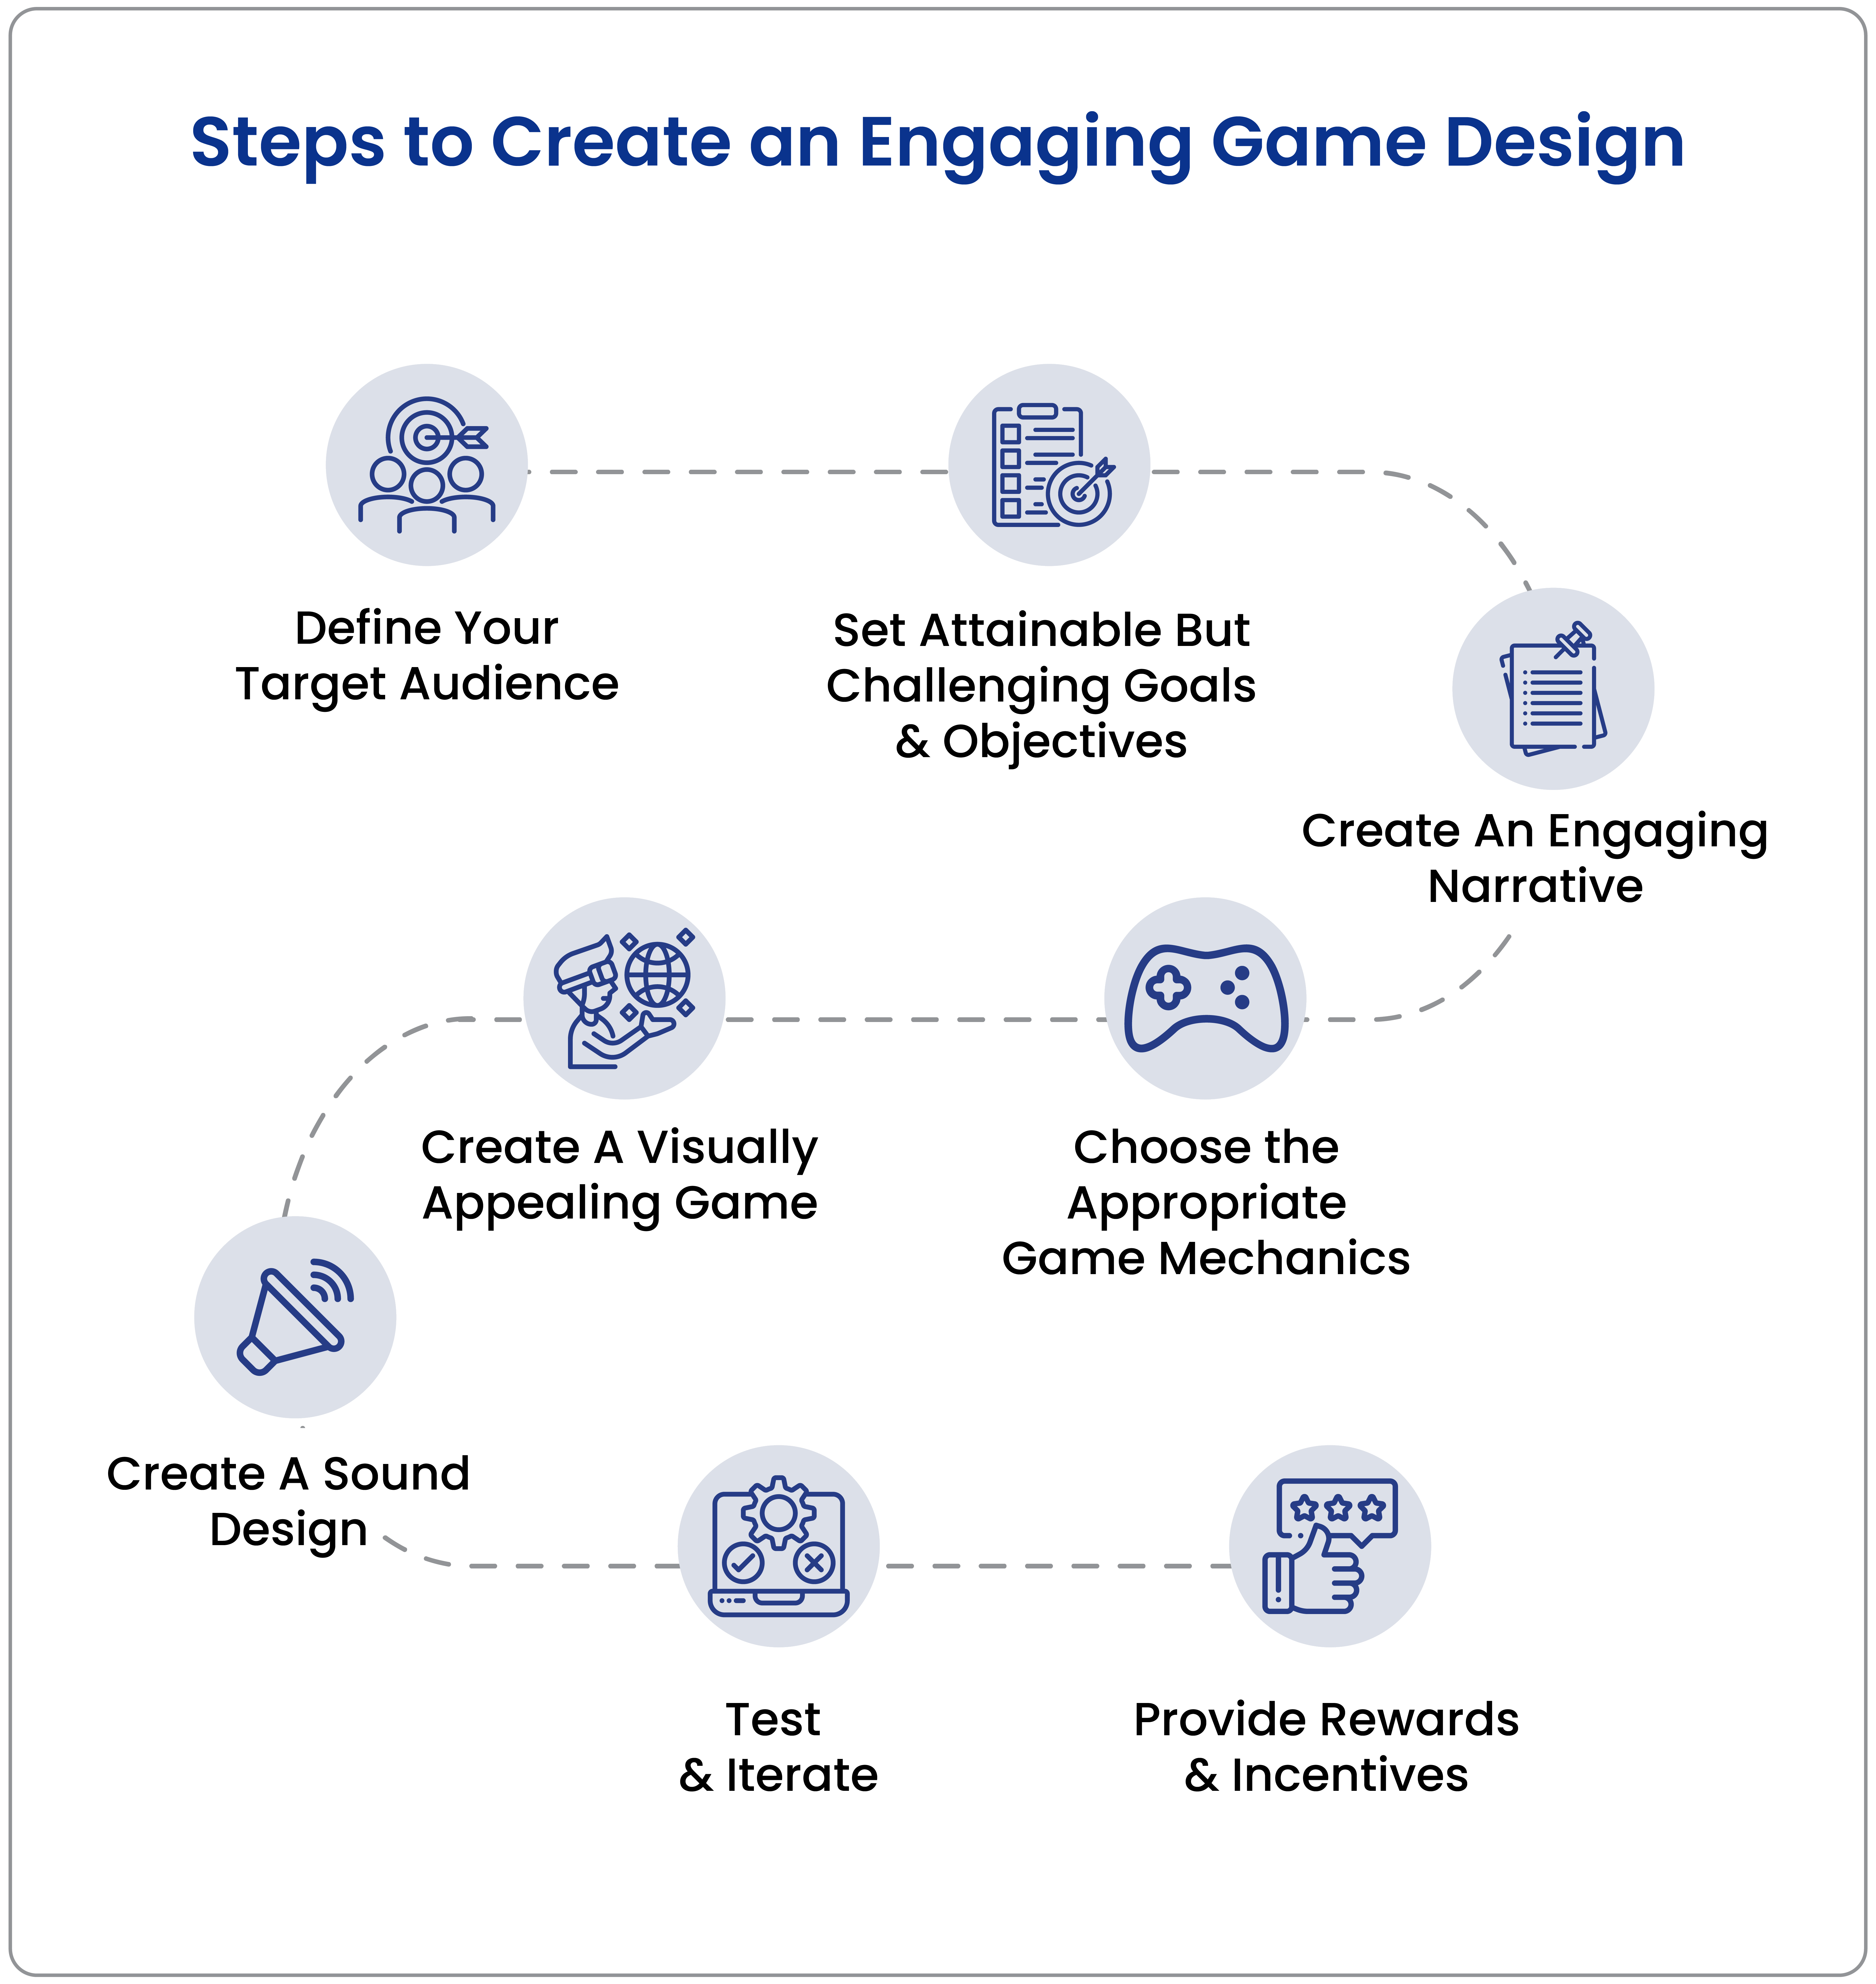 Steps to Create an Engaging Game Design